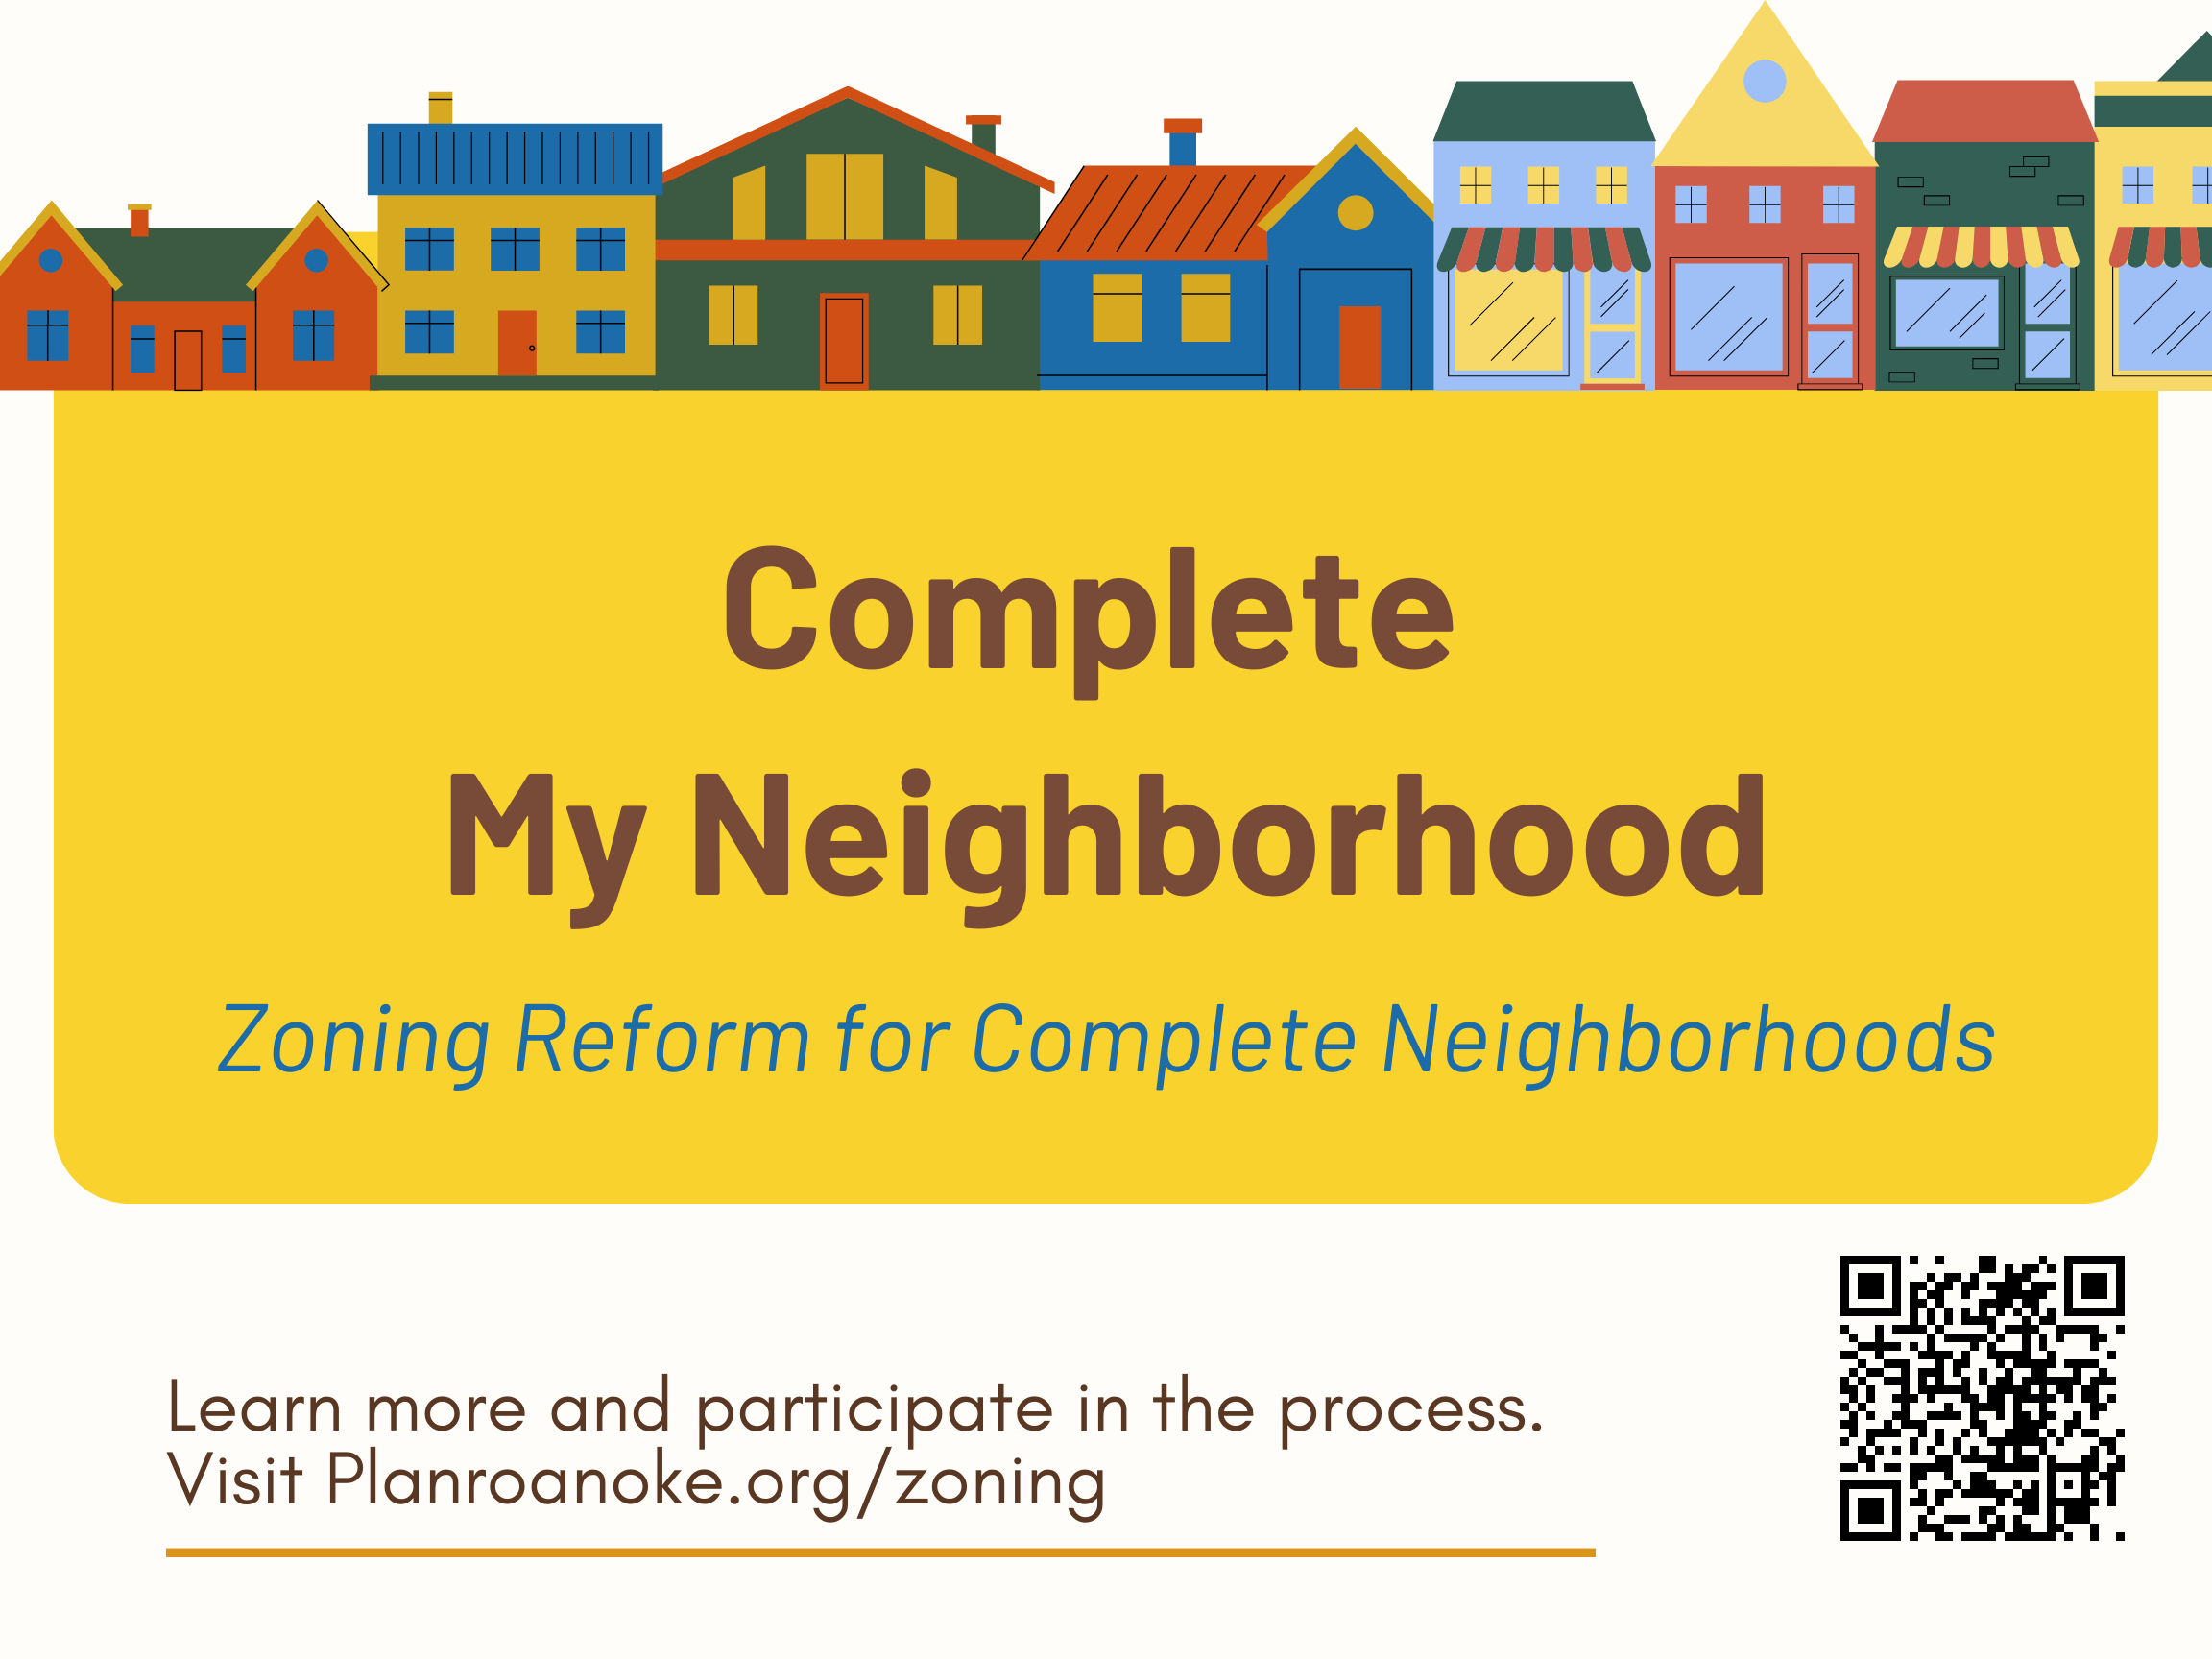 Houses with text stating "complete my neighborhood". Bottom of image includes a url and qr code for planroanoke.org/zoning